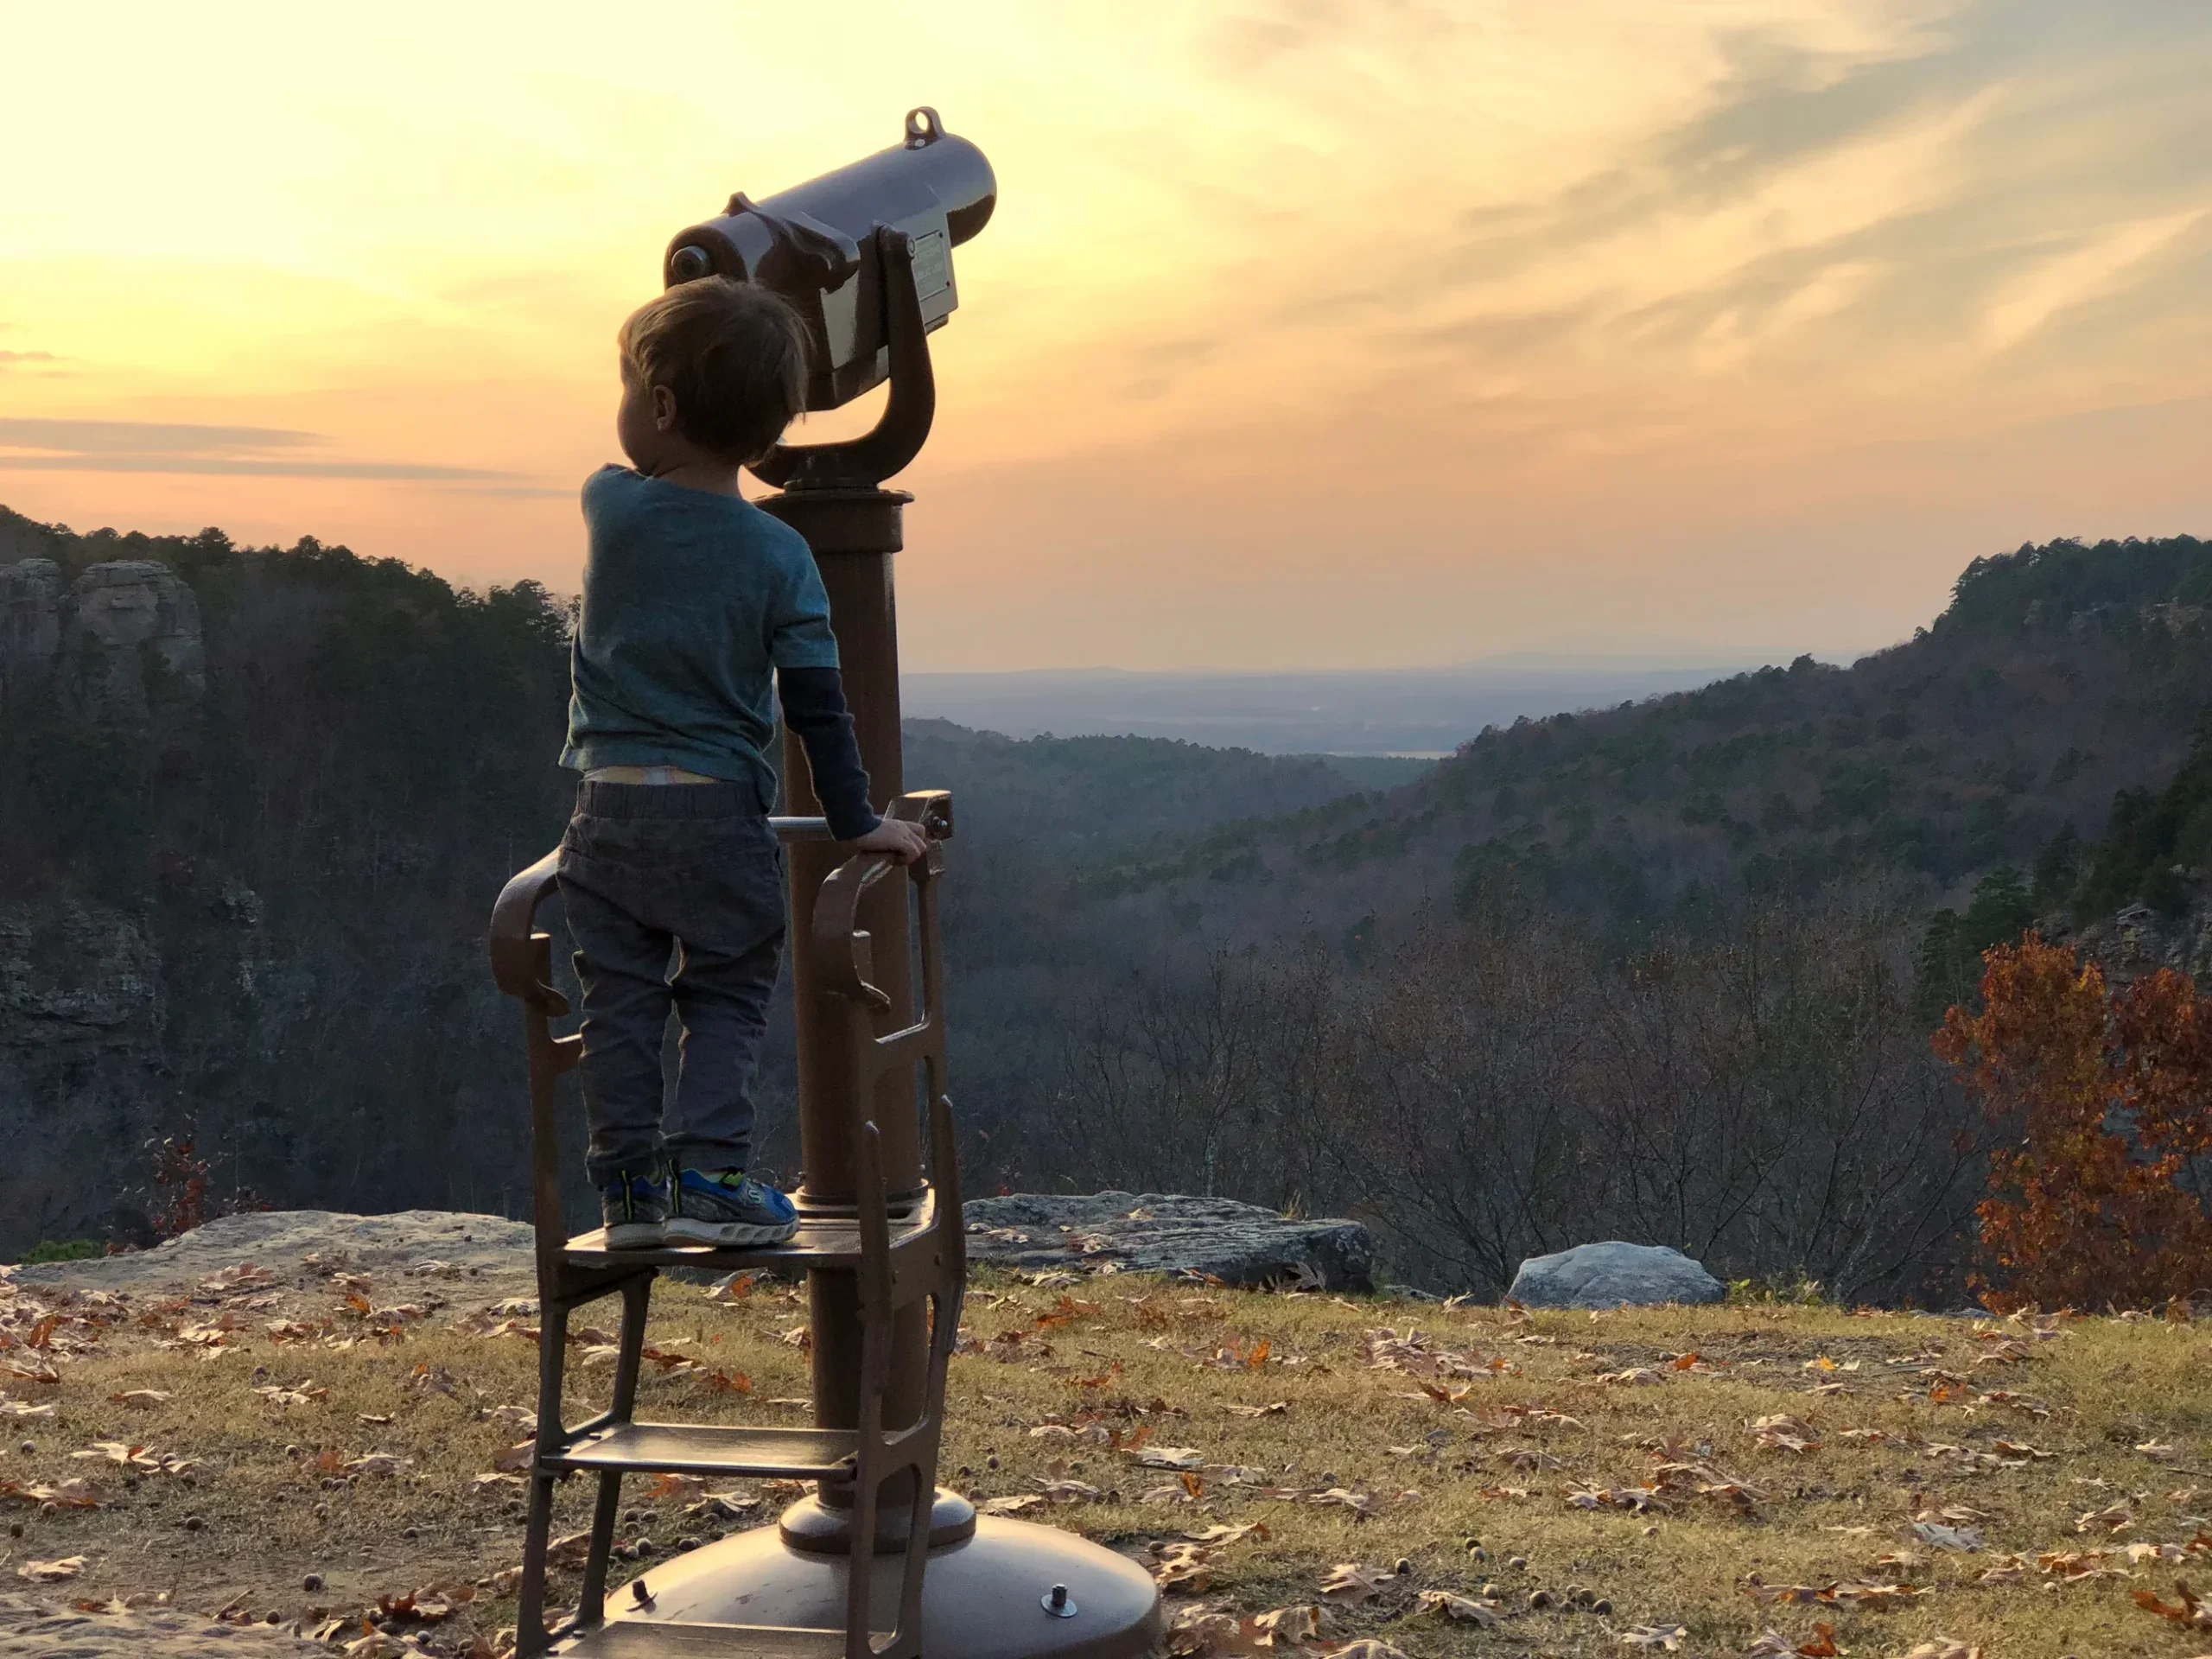 Toddler standing at a statinary telescope at an overlook during sunset.